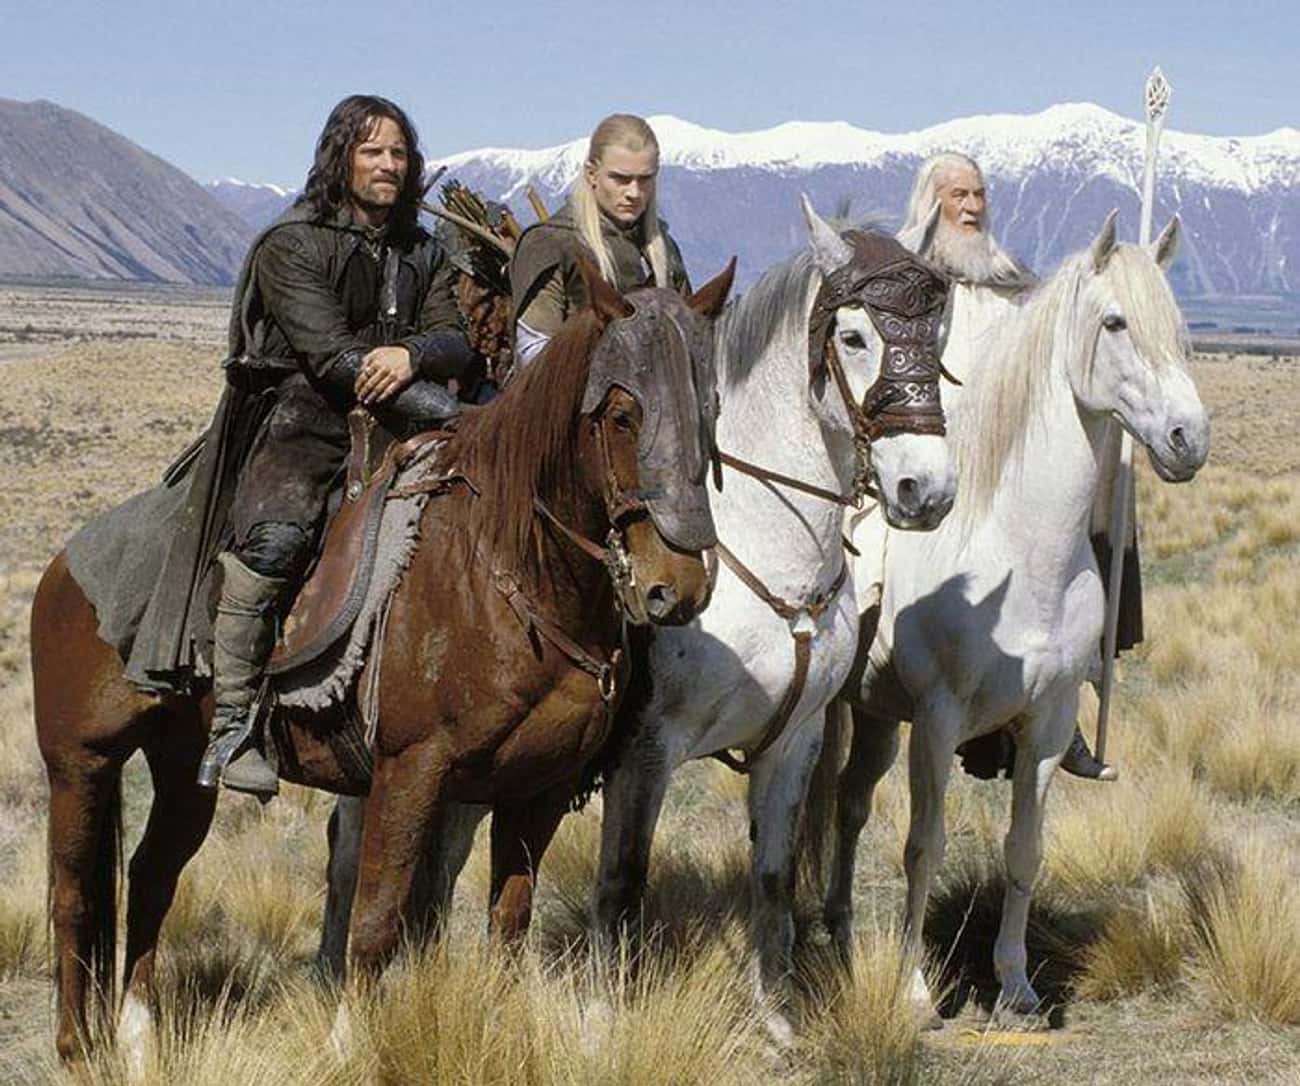 Legolas Bows To Shadowfax Because He Recognizes The 'Lord Of Horses'